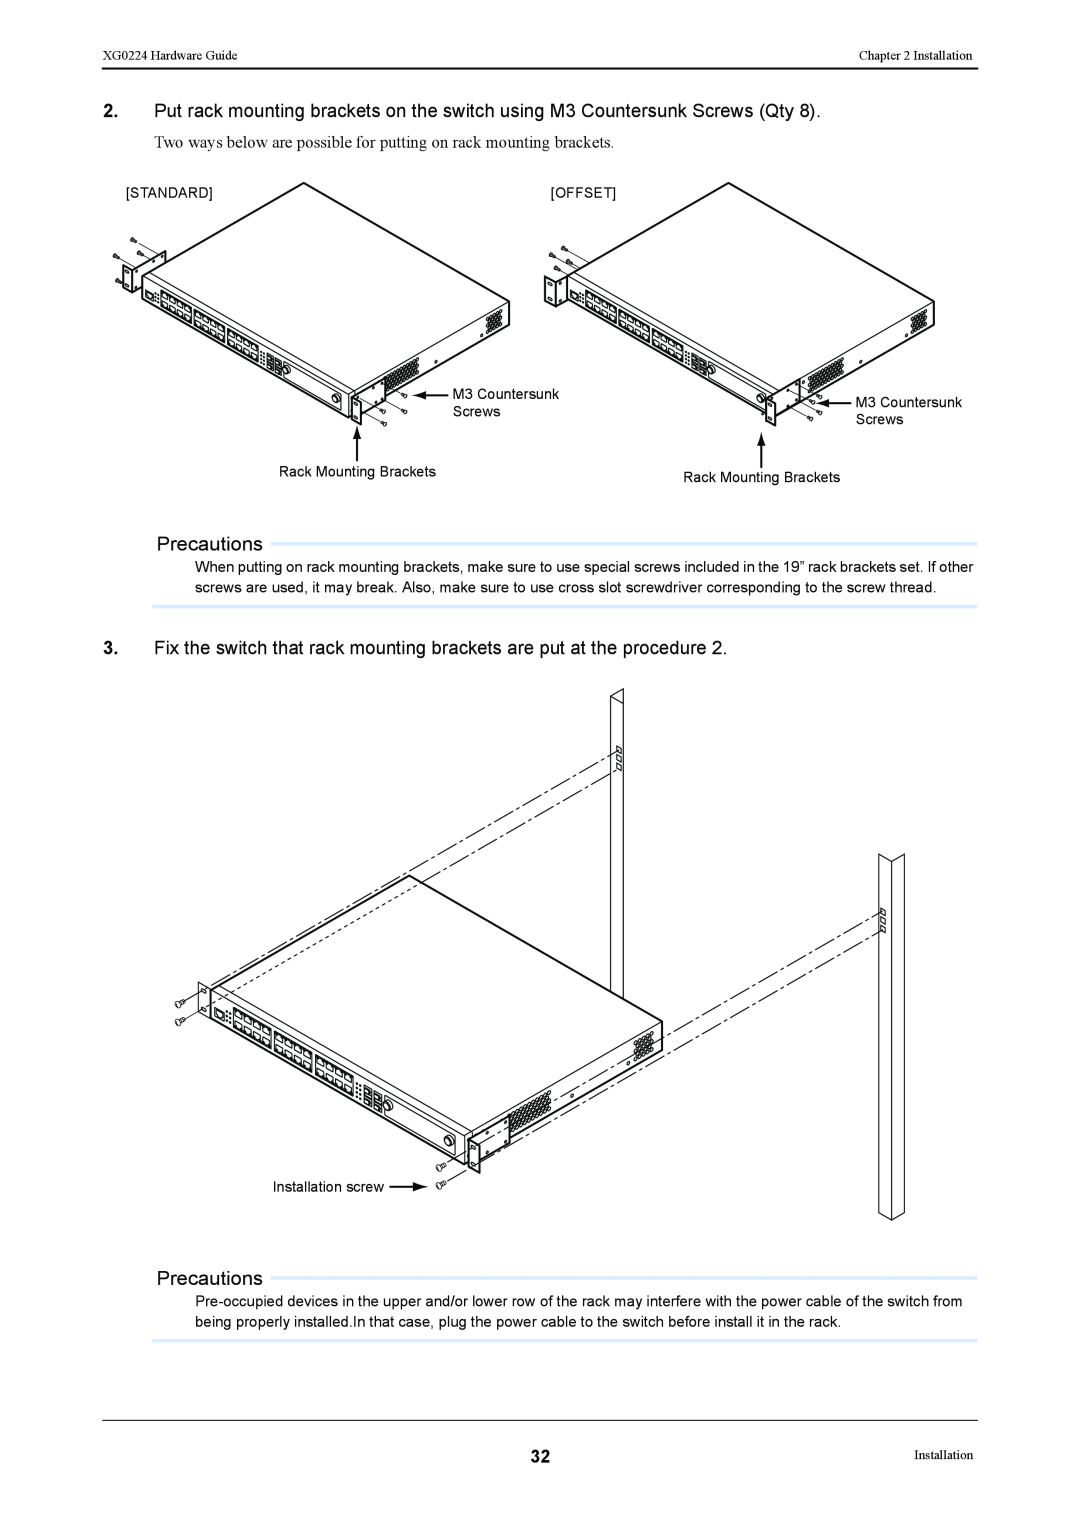 Fujitsu XG0224 manual Two ways below are possible for putting on rack mounting brackets 